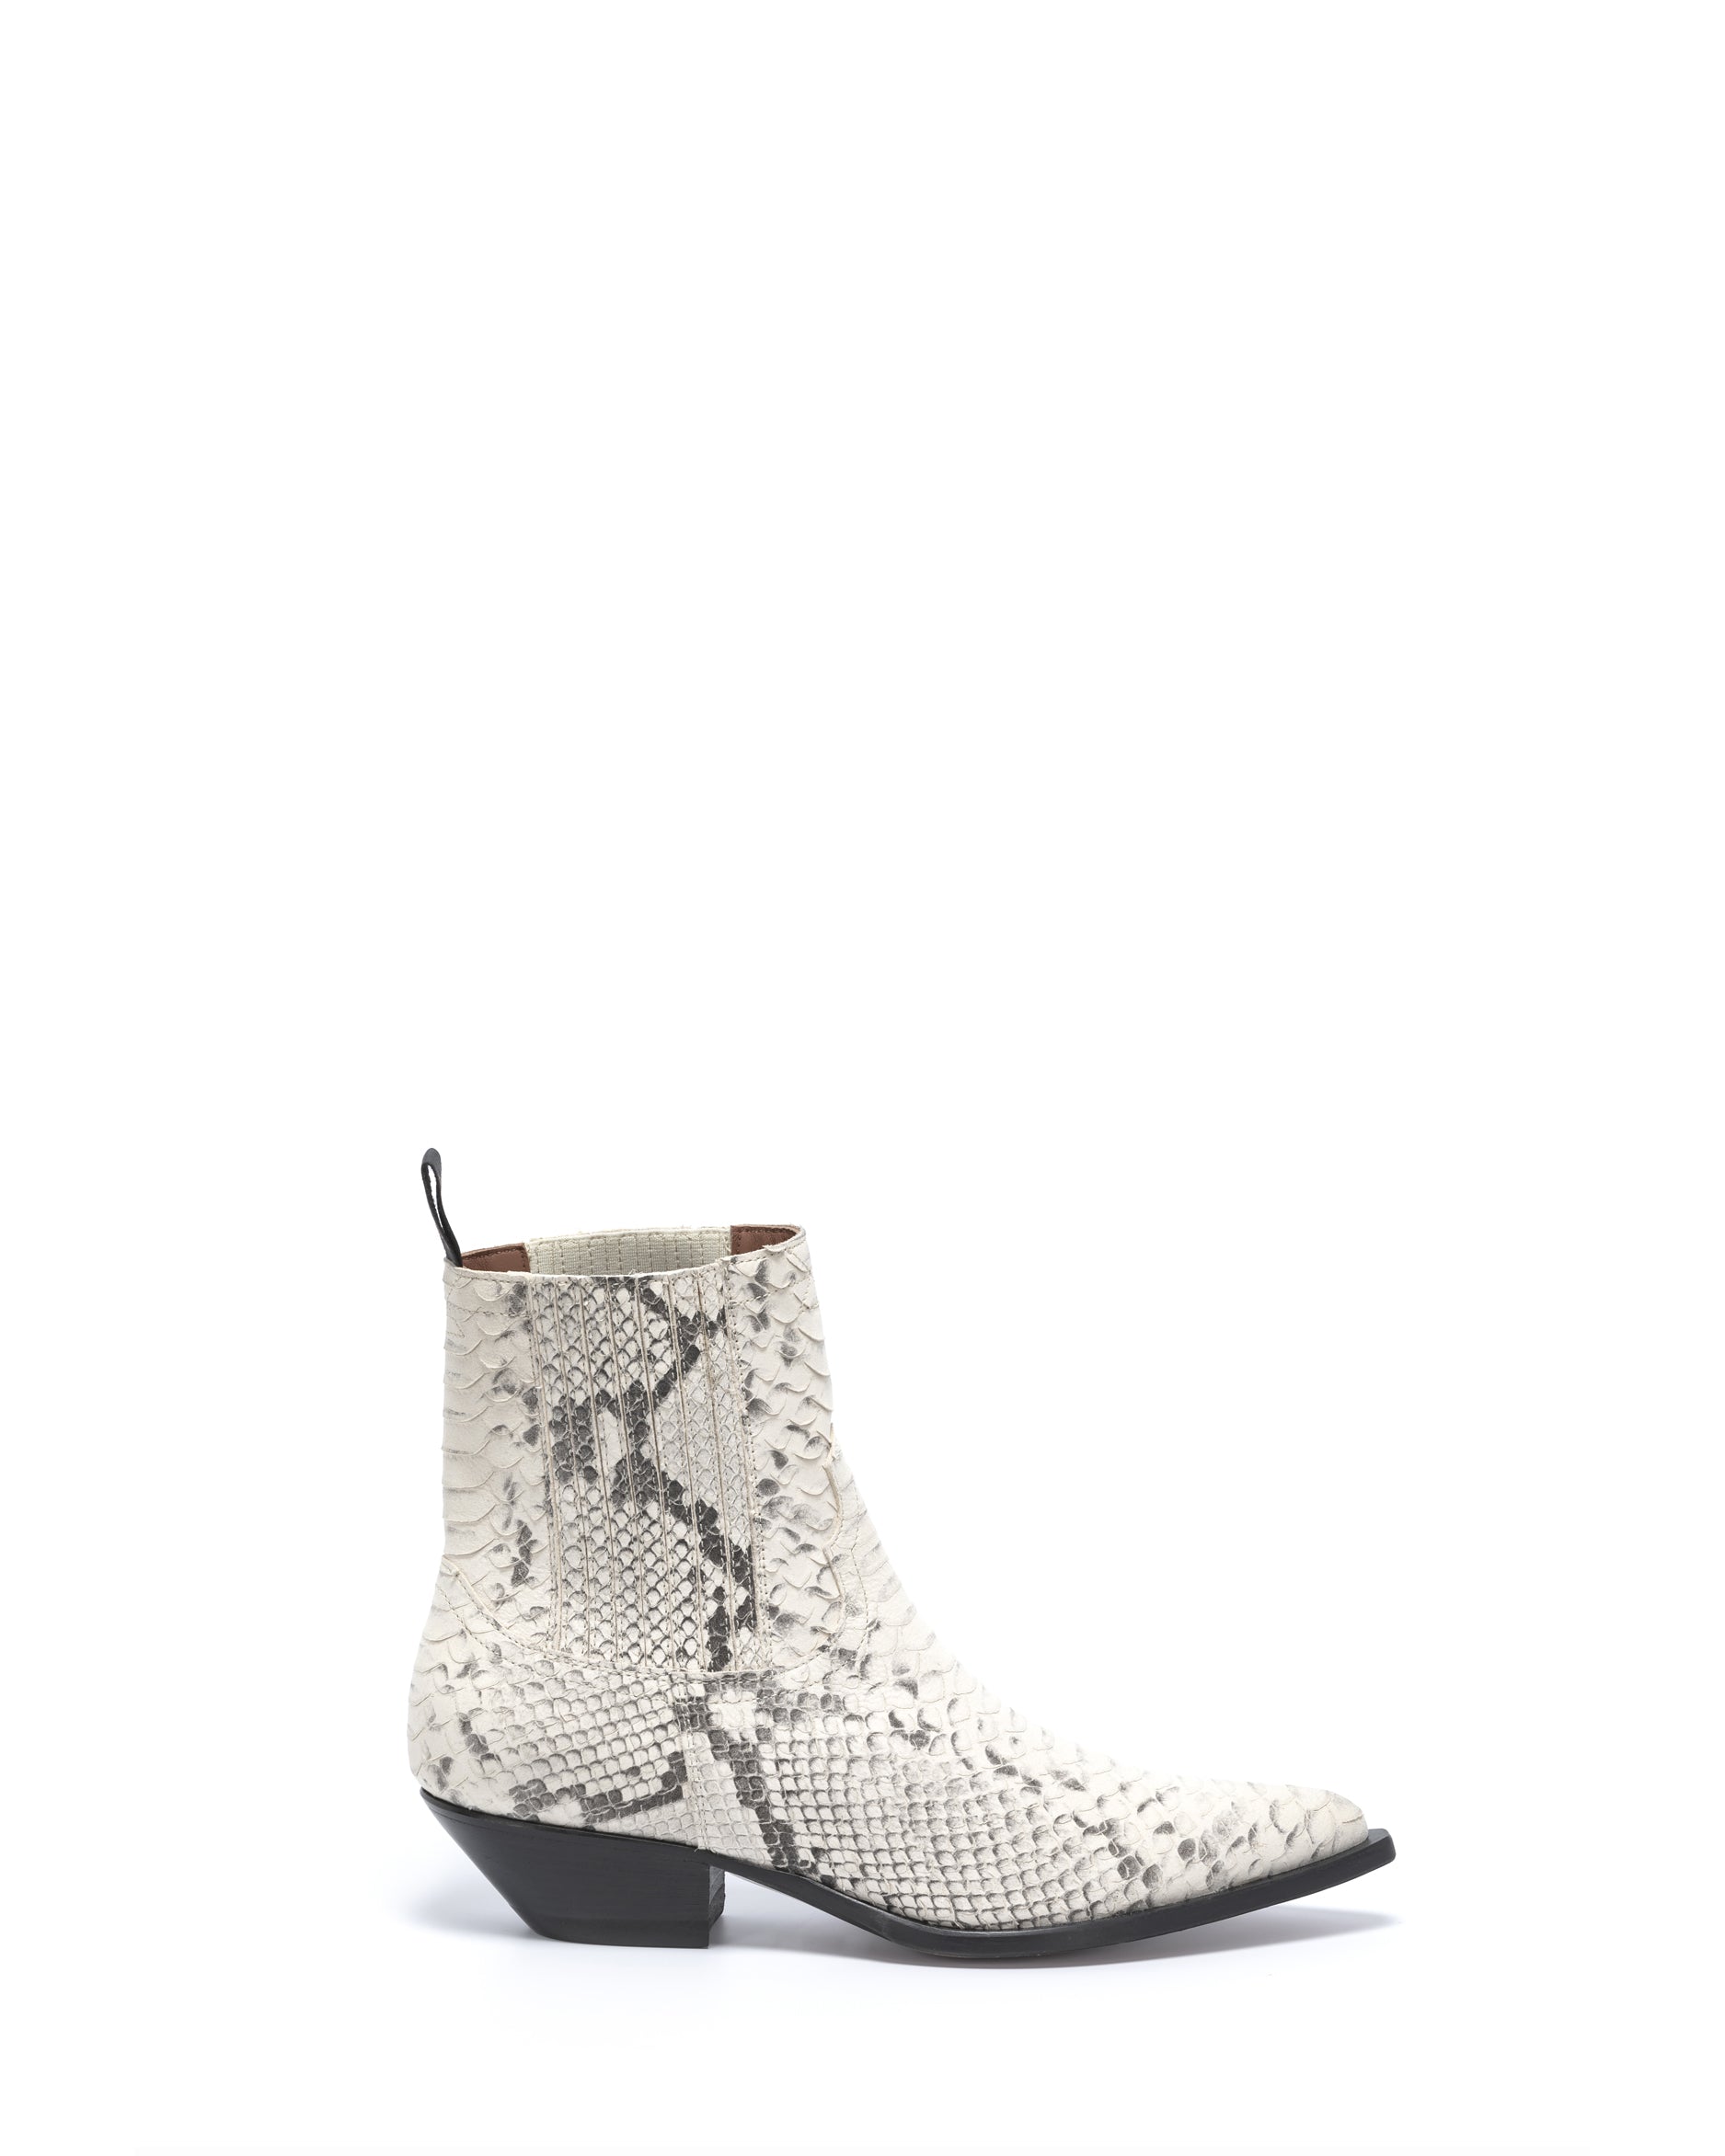 Punktlighed plus løg HIDALGO Men's Ankle Boots in Grey Printed Python – Sonora Boots